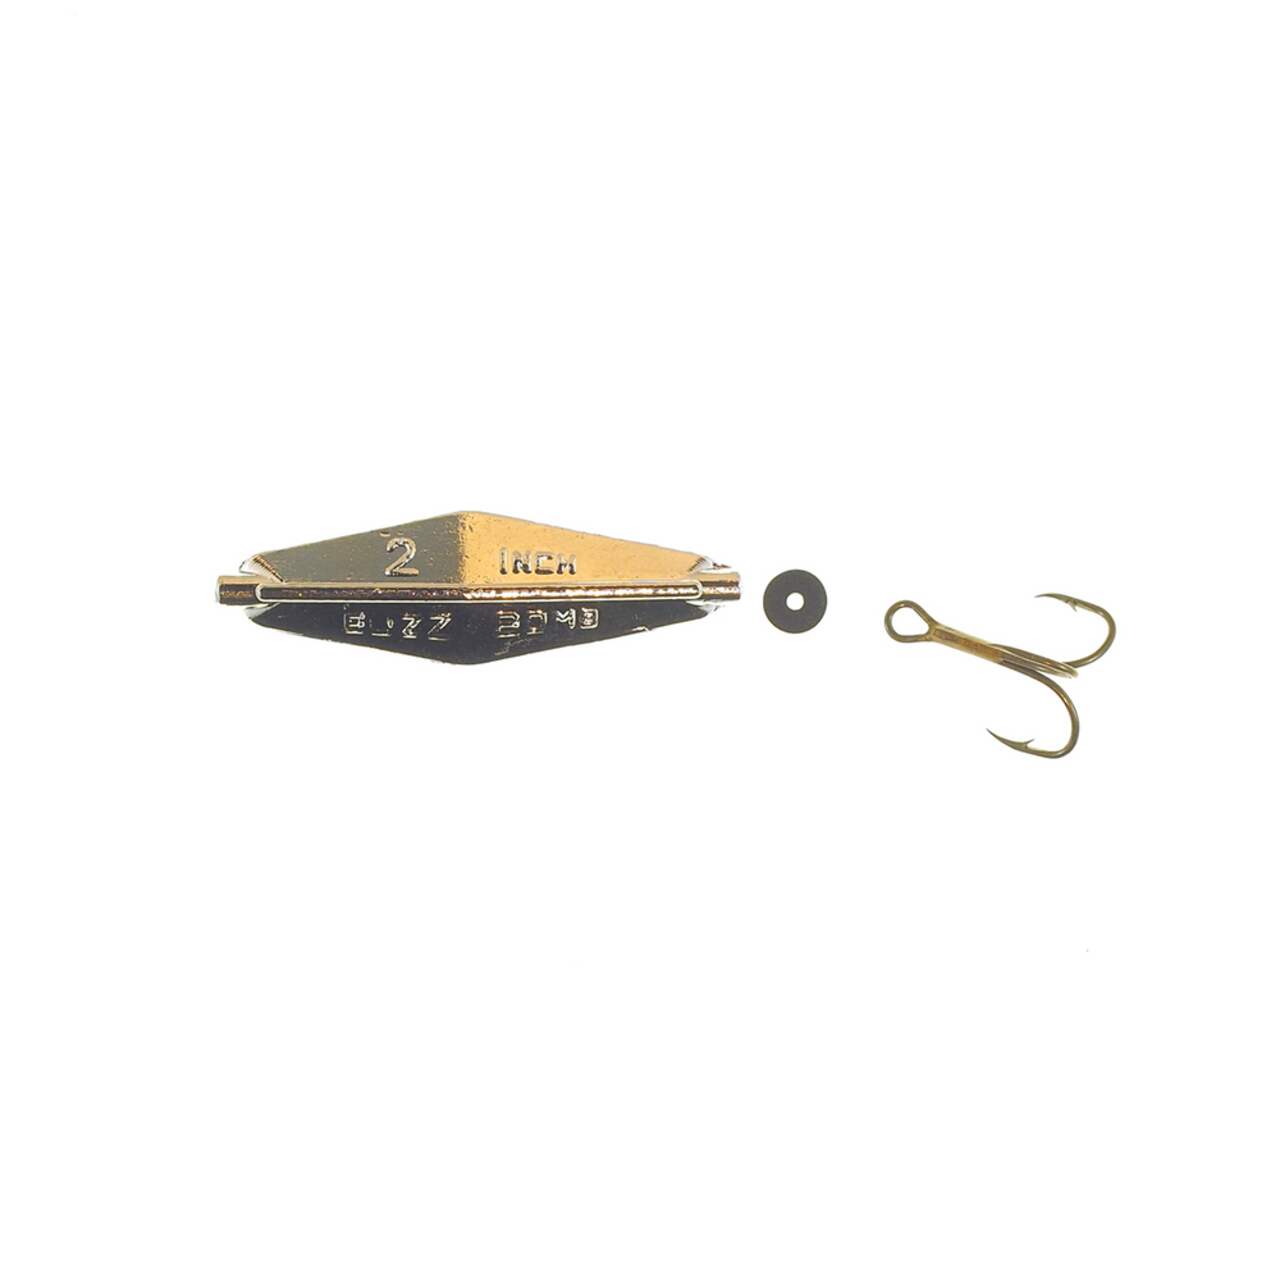 Buzz Bomb Lure, 2-in